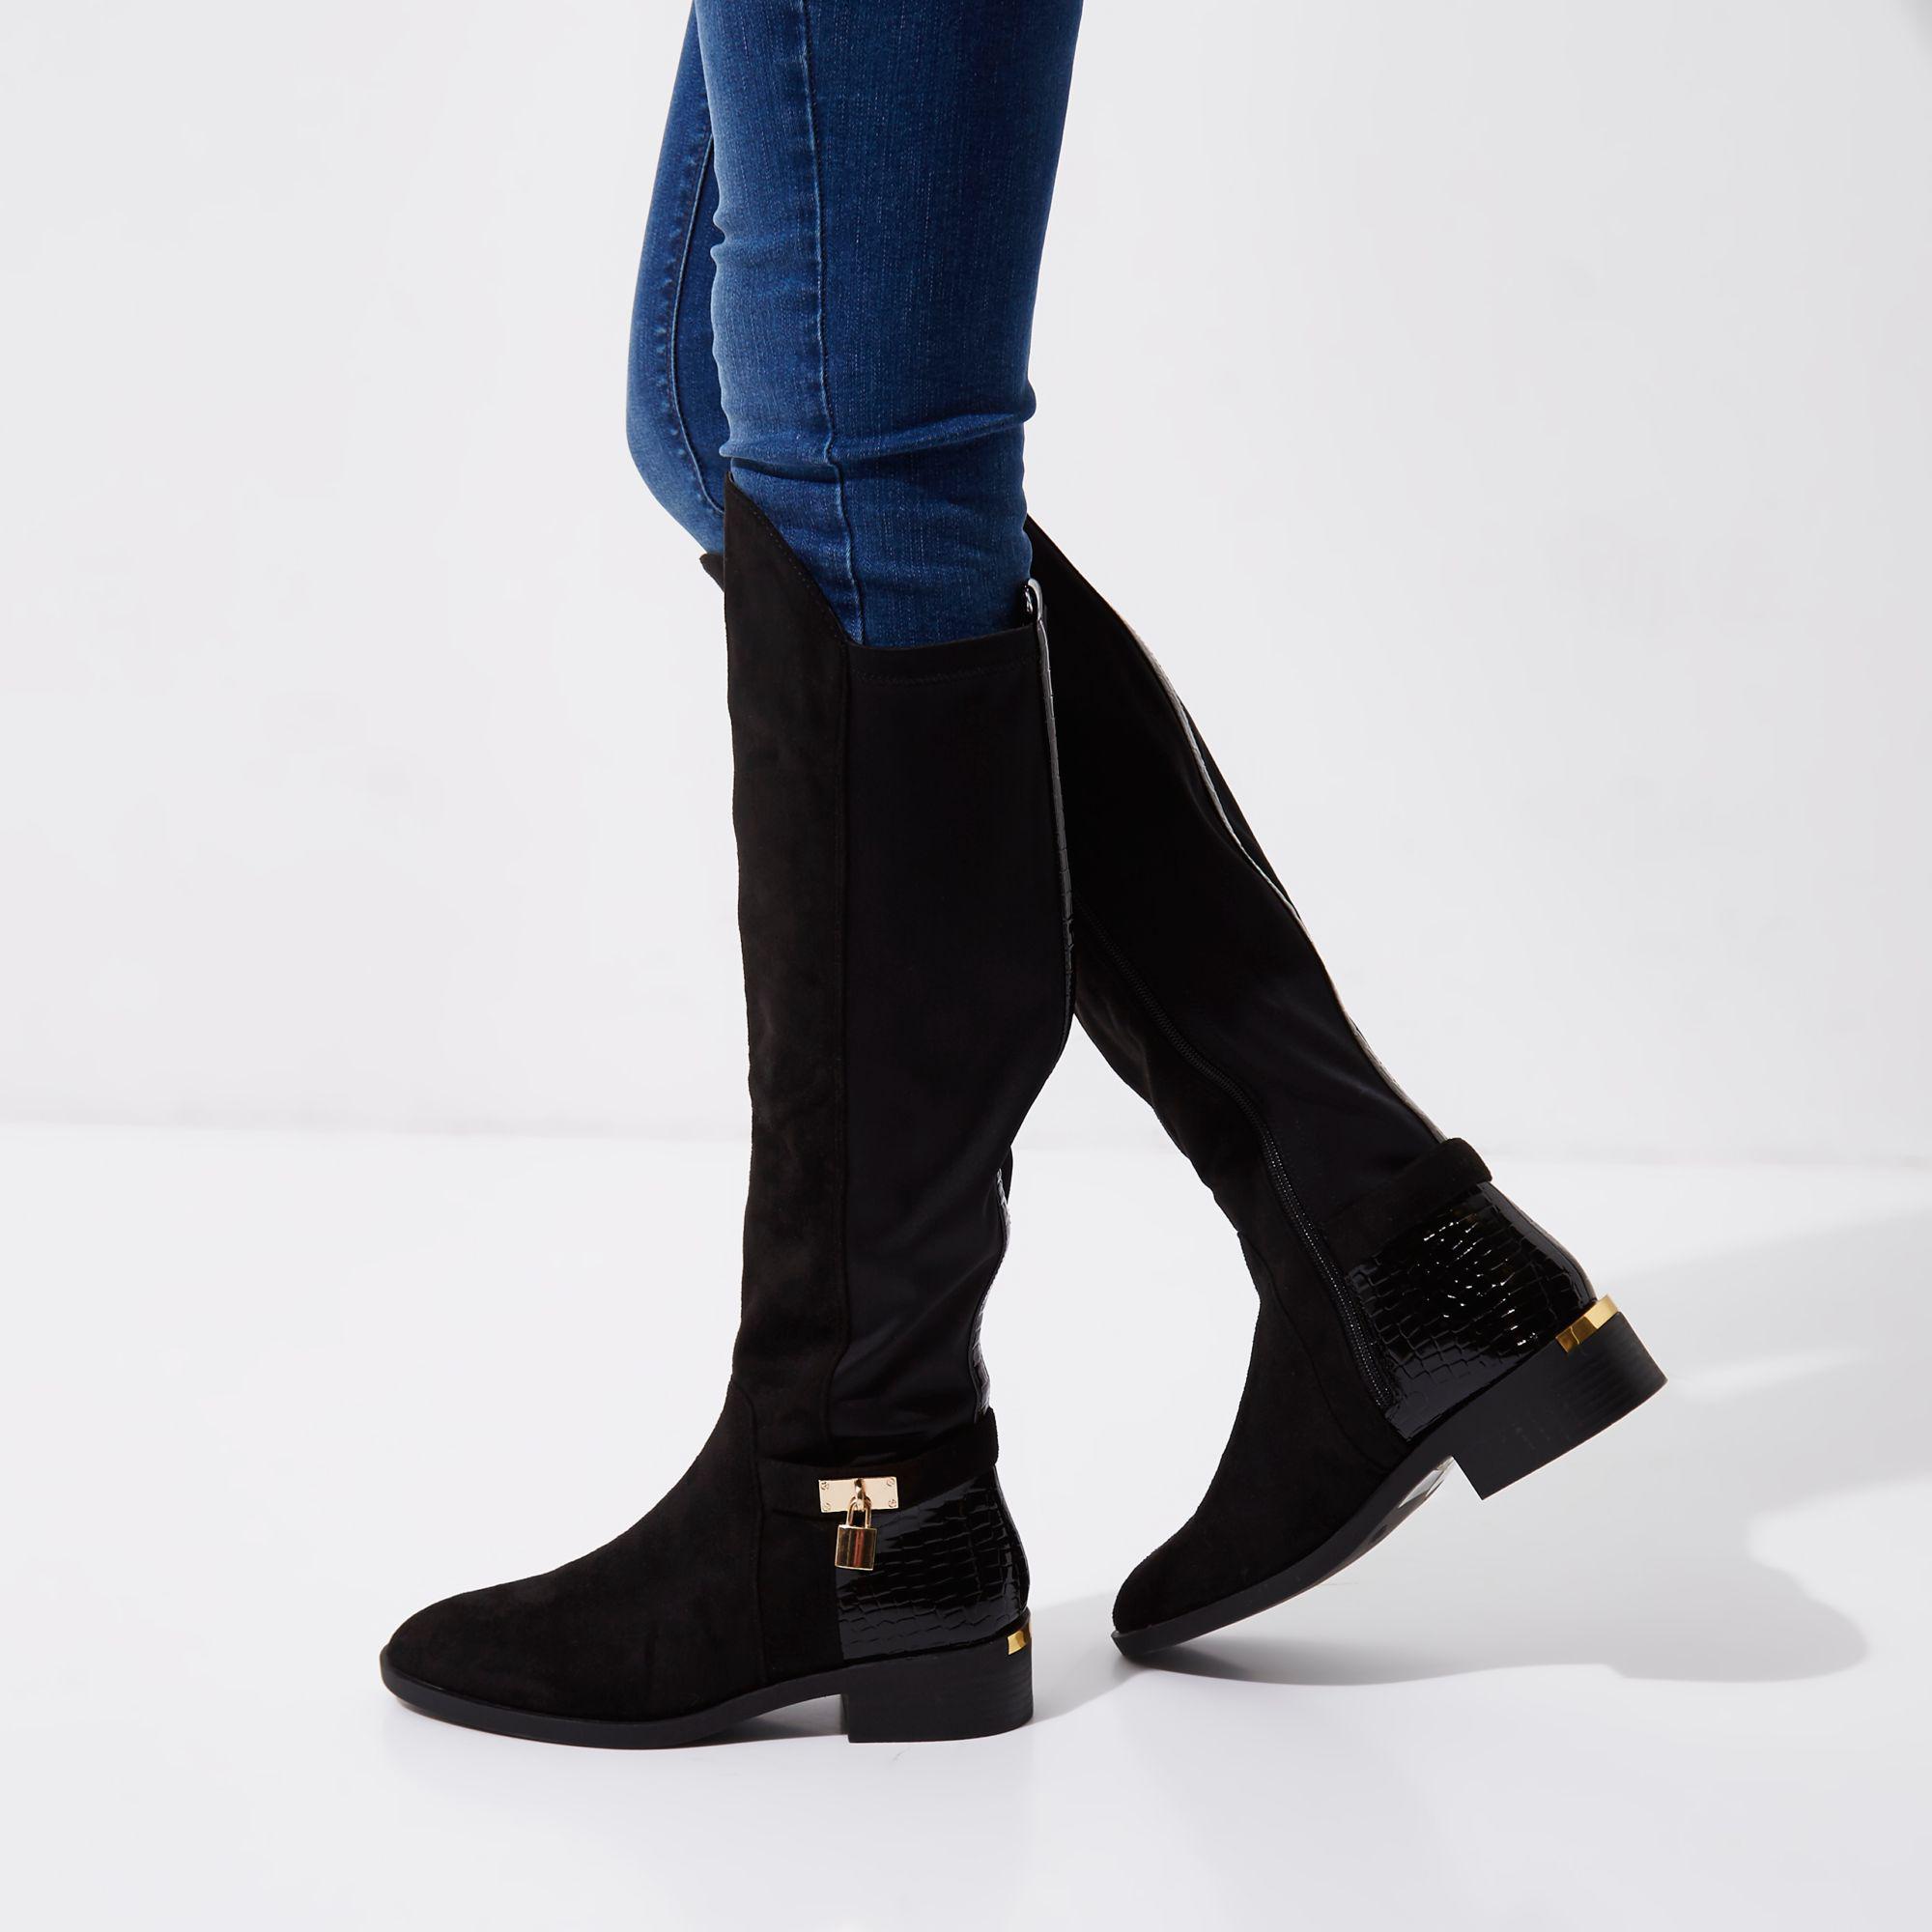 River Island Black Knee High Riding Boots in Black - Lyst